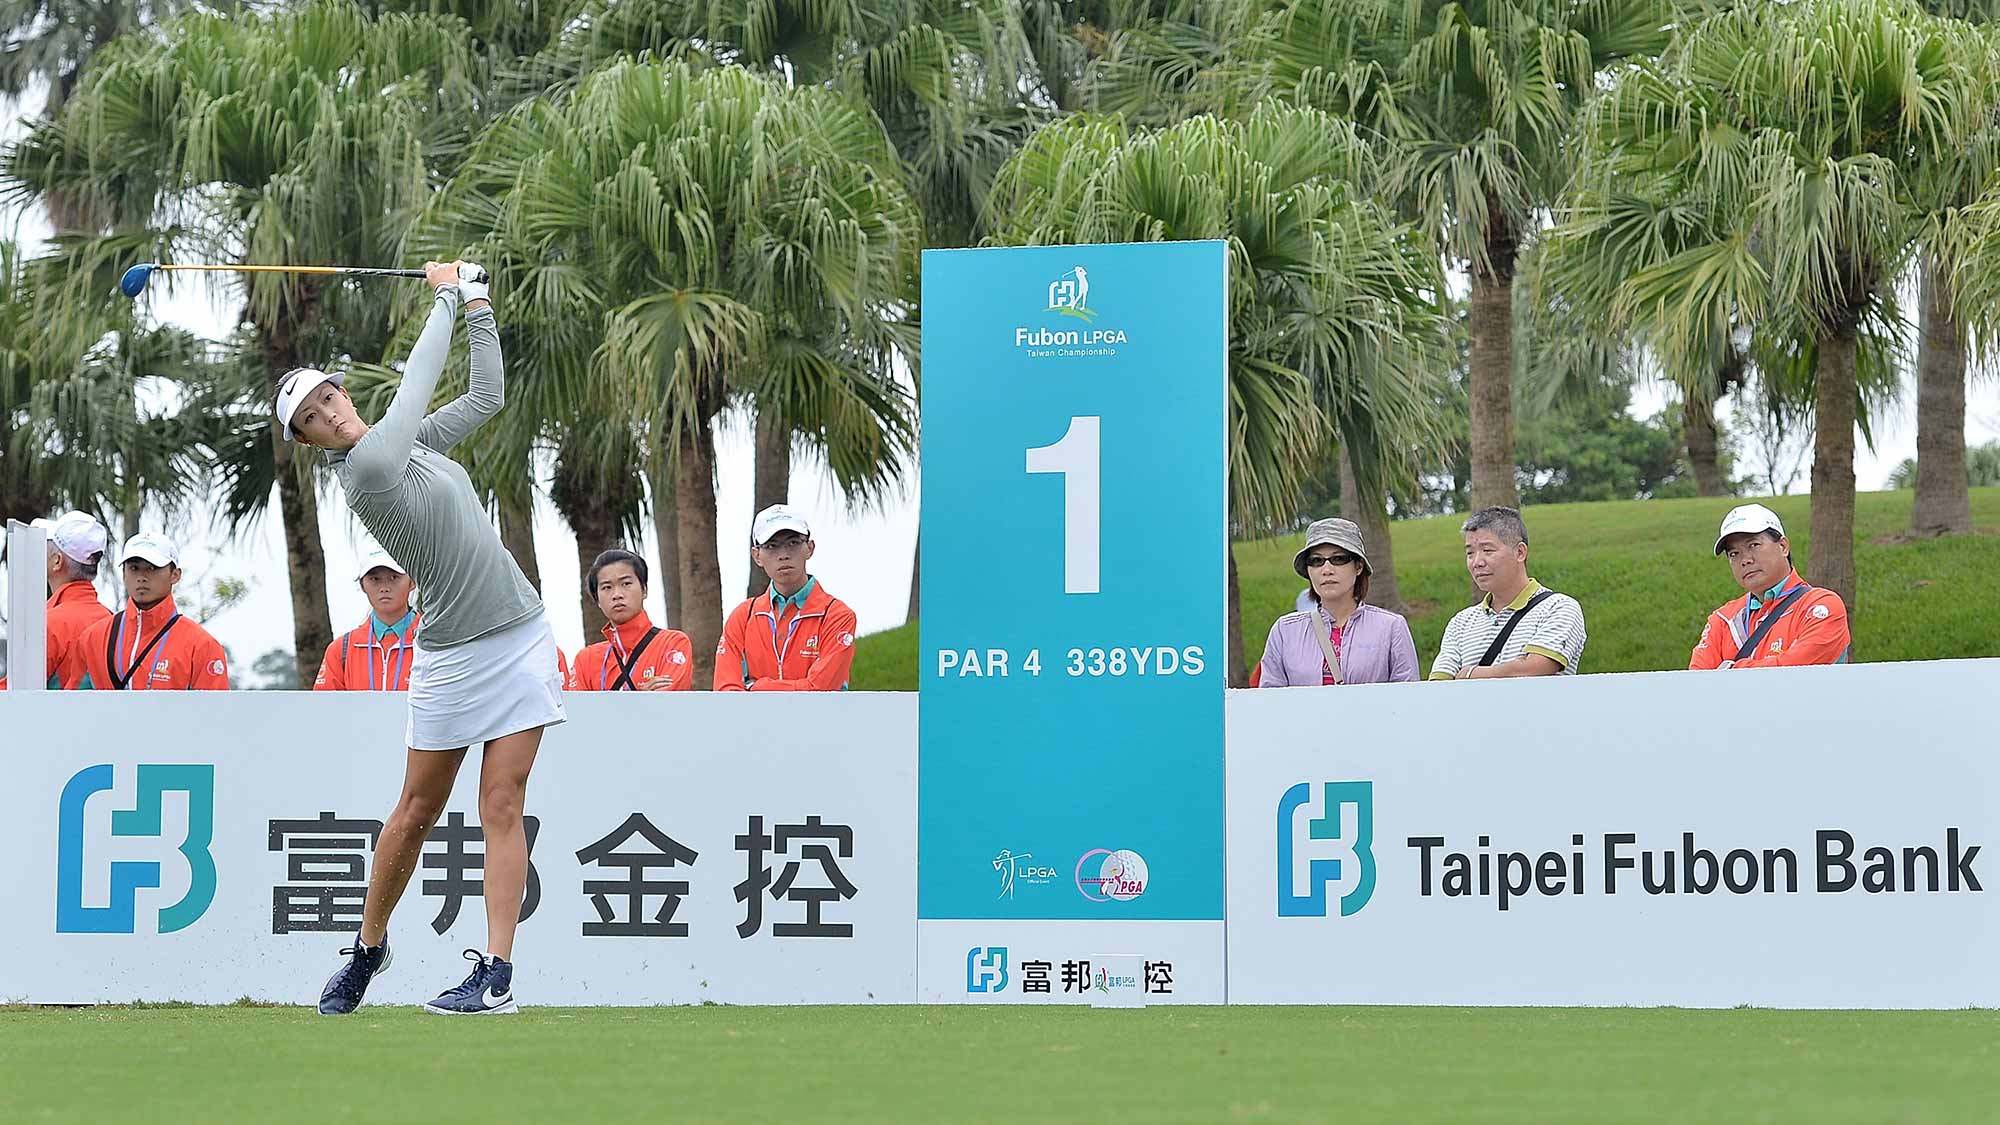 Michelle Wie of the United States plays the shot during the round one of 2015 Fubon LPGA Taiwan Championship at Miramar Golf & Country Club